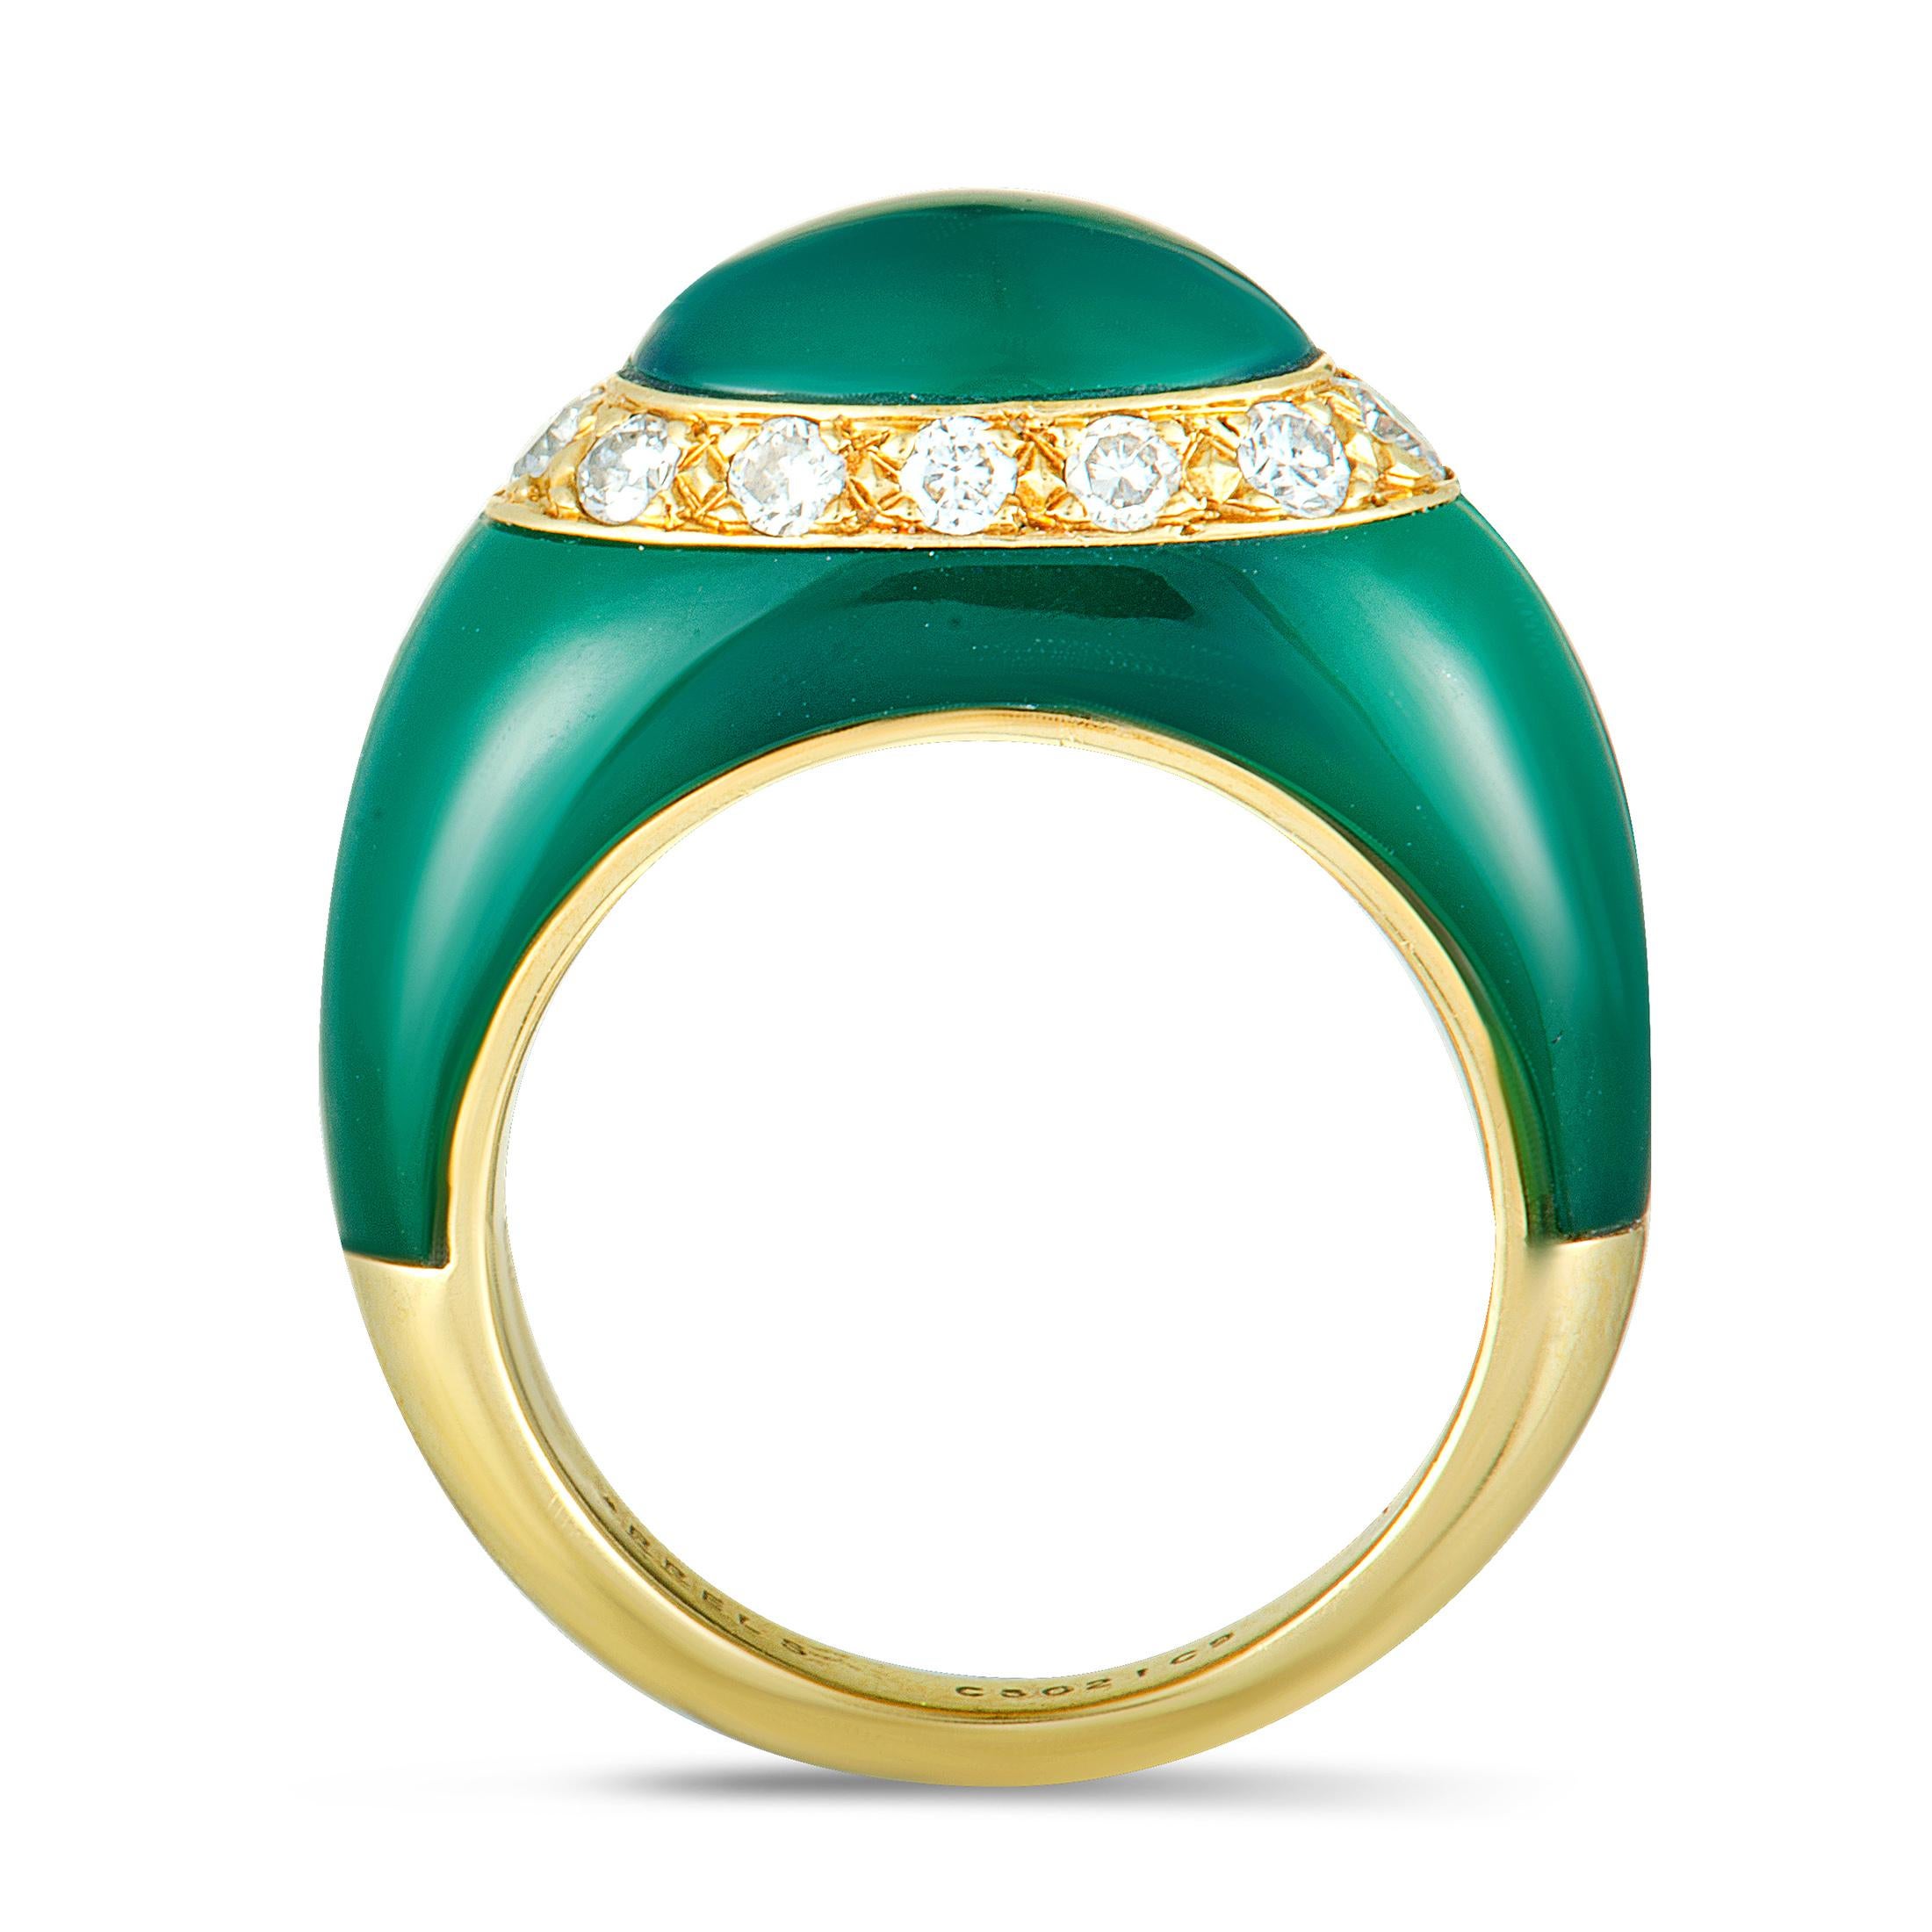 This extraordinary vintage piece from Van Cleef & Arpels is designed in an exceptionally refined manner and attractively embellished with stunning chrysoprase and diamond stones. The ring is exquisitely made of 18K yellow gold and it weighs nine